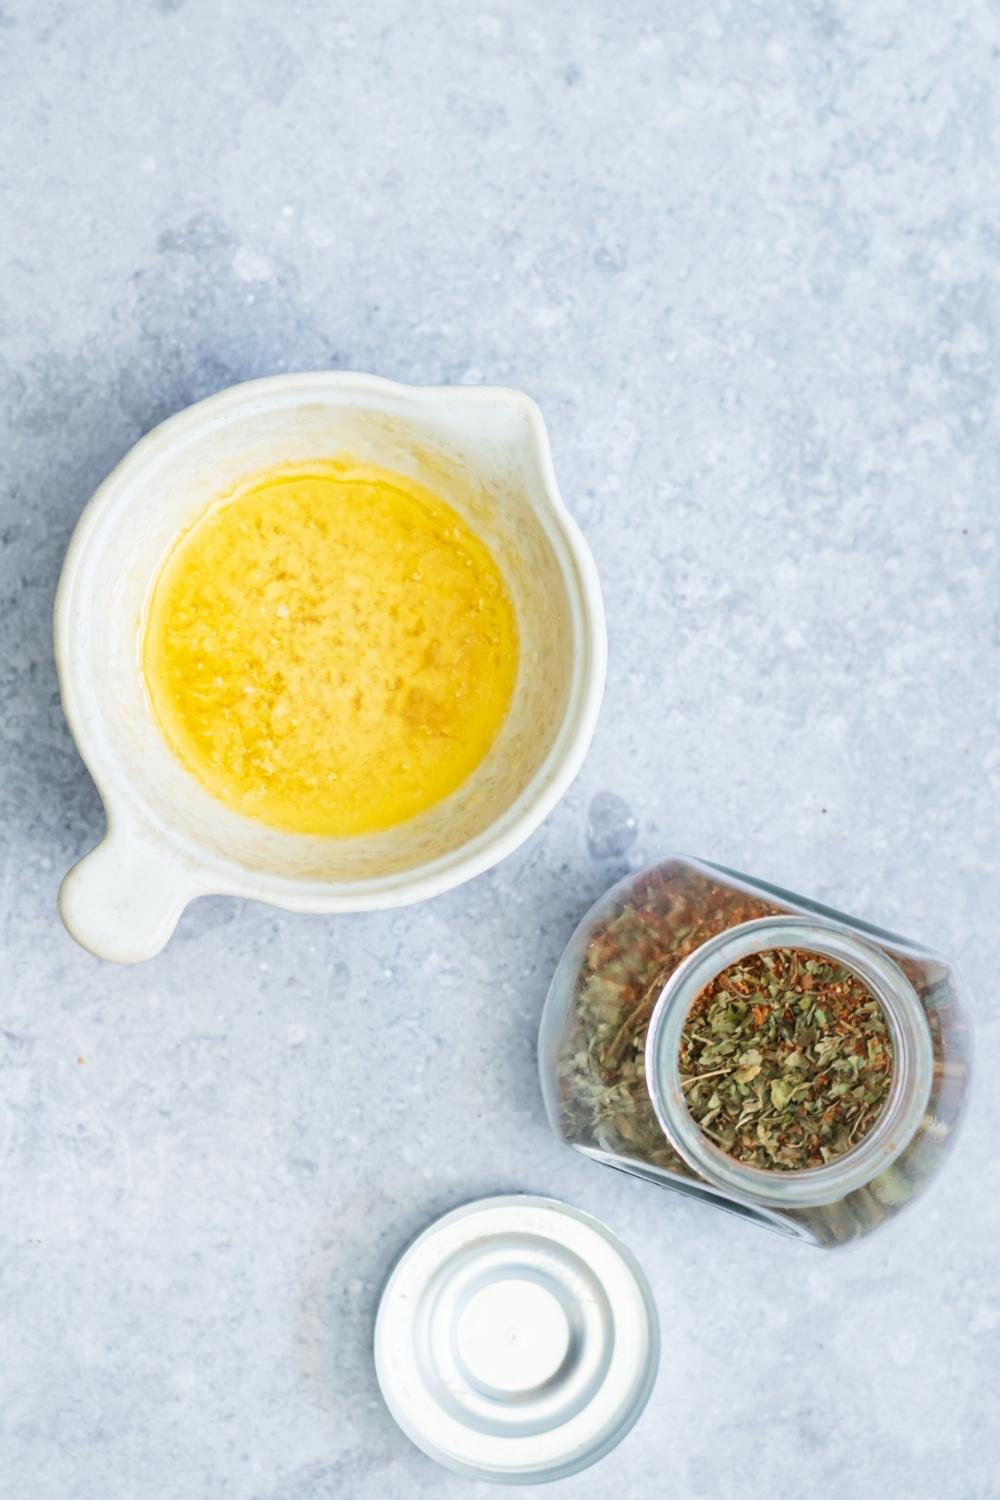 A bowl of melted butter and a glass jar of blackened seasoning on a grey counter.